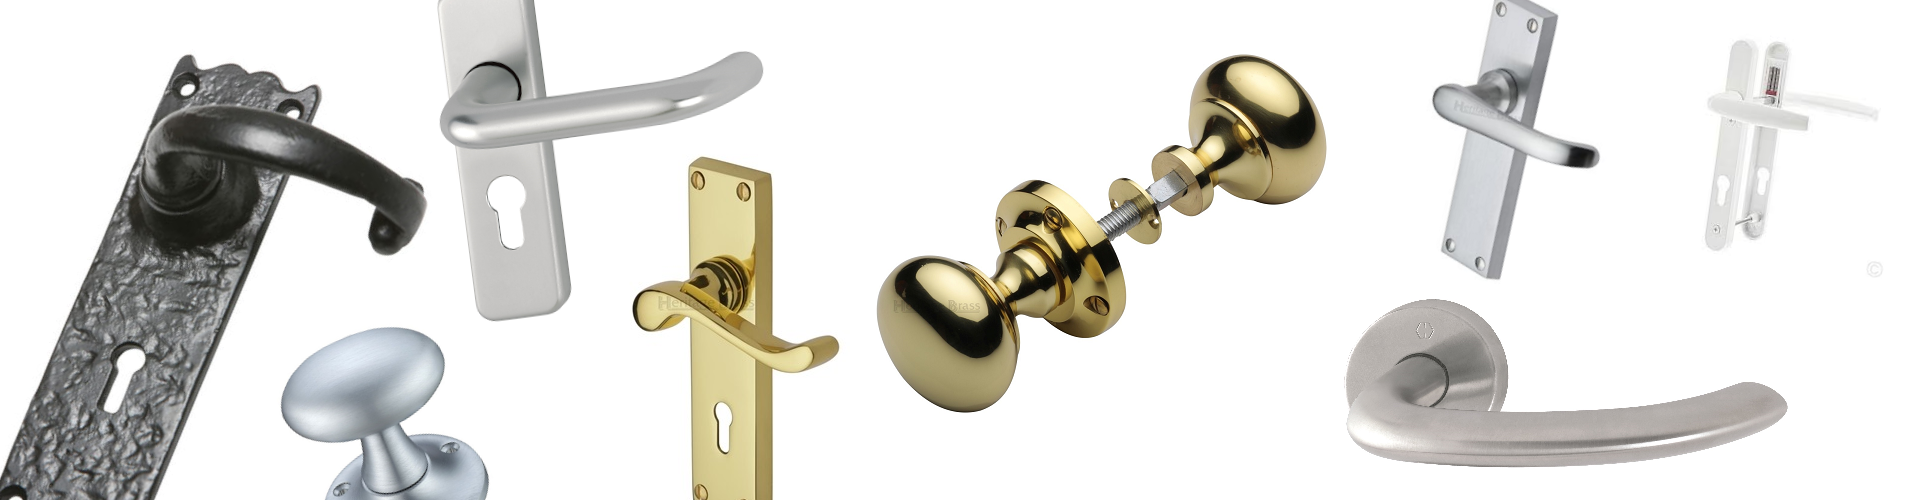 image shows a range of door handles and knobs in a selection of types, colours, and finishes. It is claickable and links to the lever doo rhandles landing page